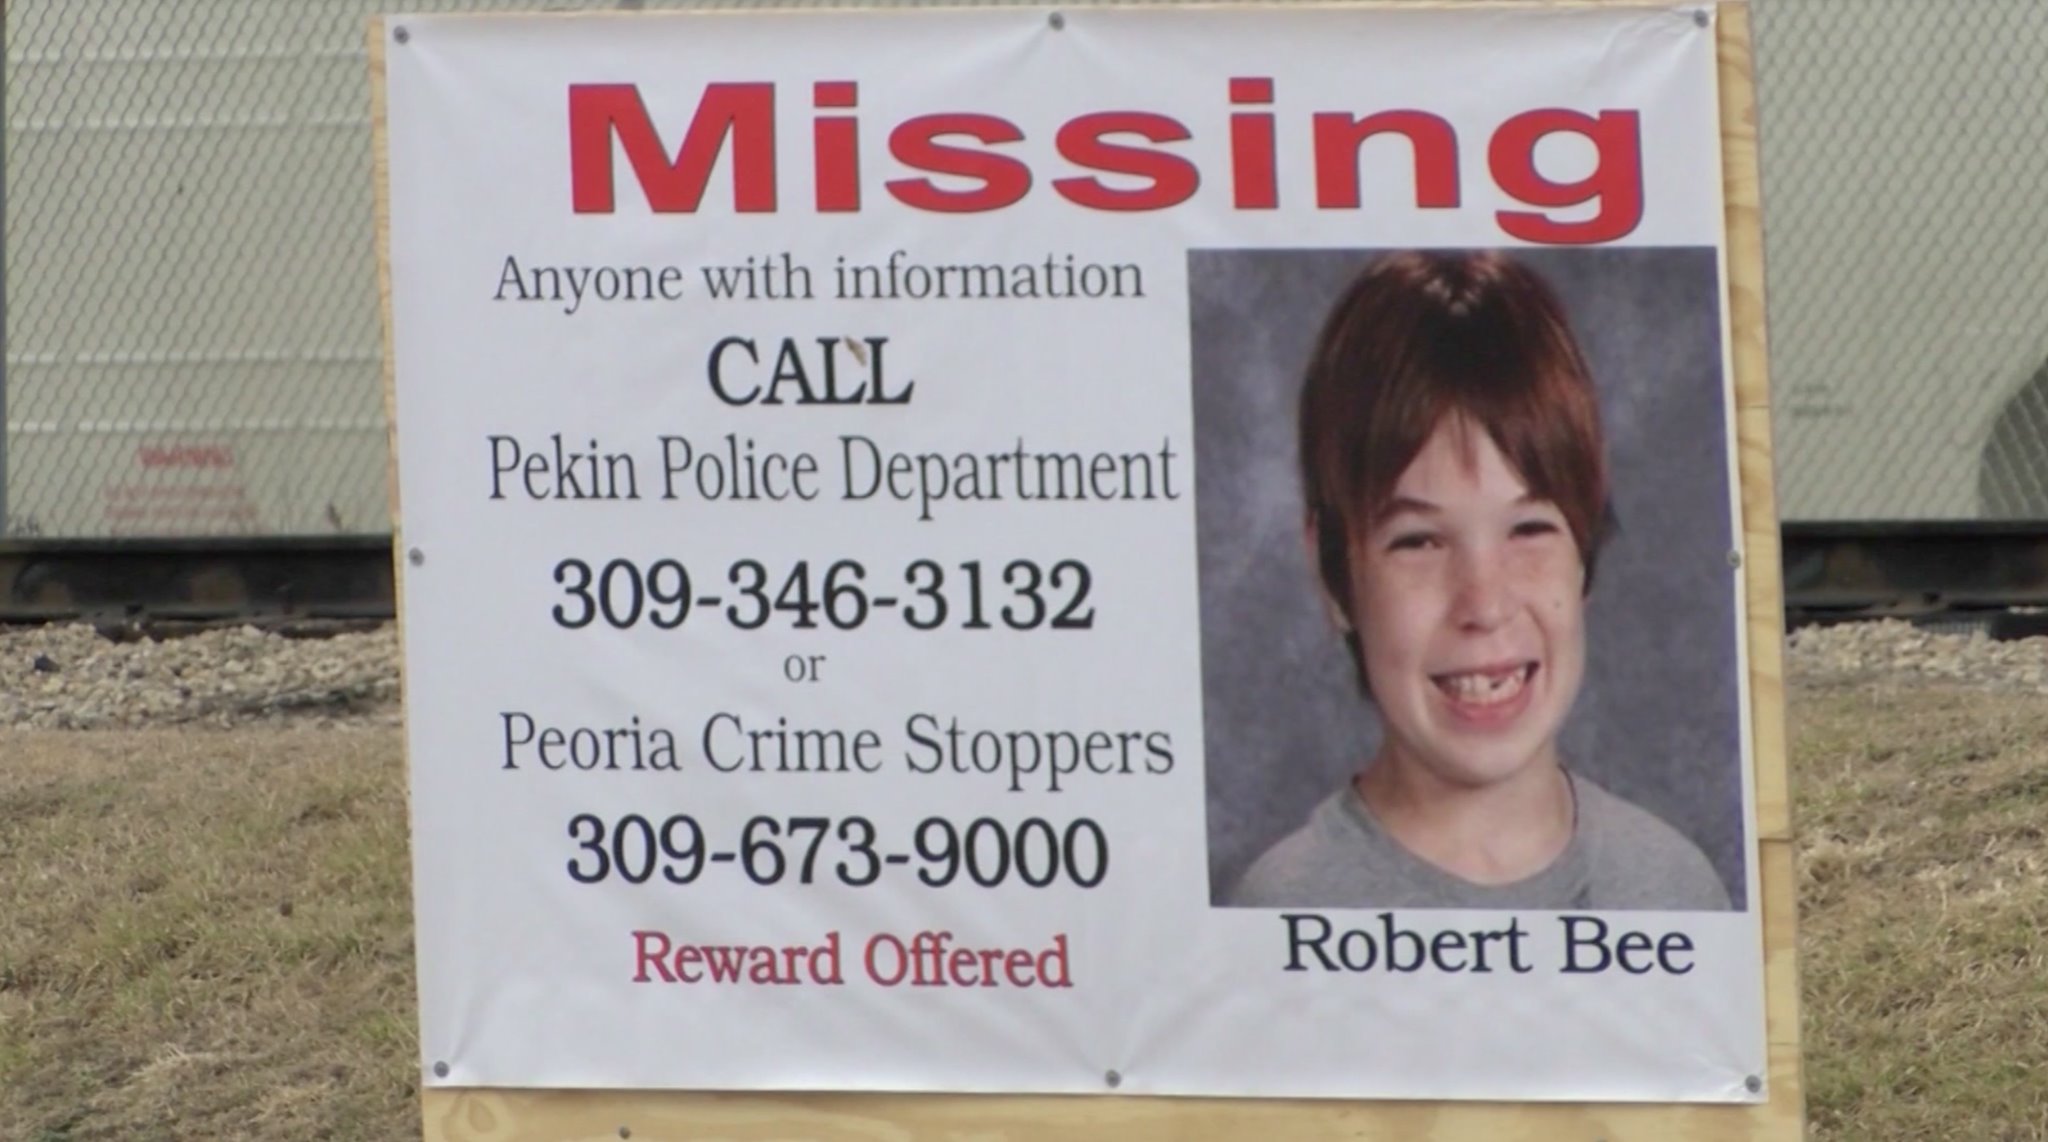 Photo of missing child sign for Robert Bee